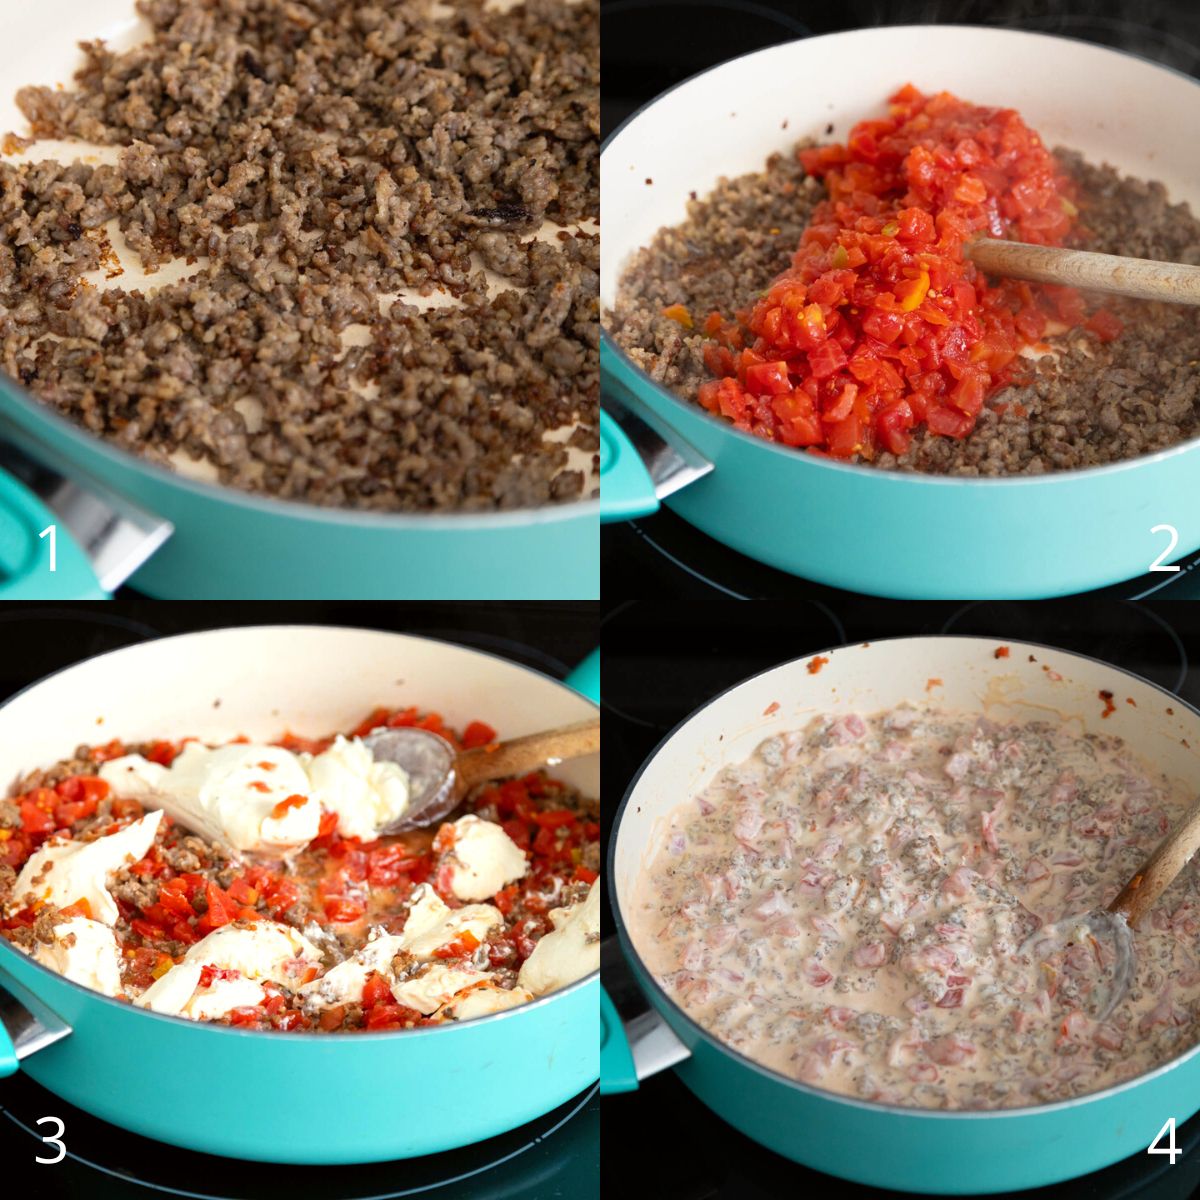 The step by step photos show how to brown the sausage and add the Rotel and cream cheese.